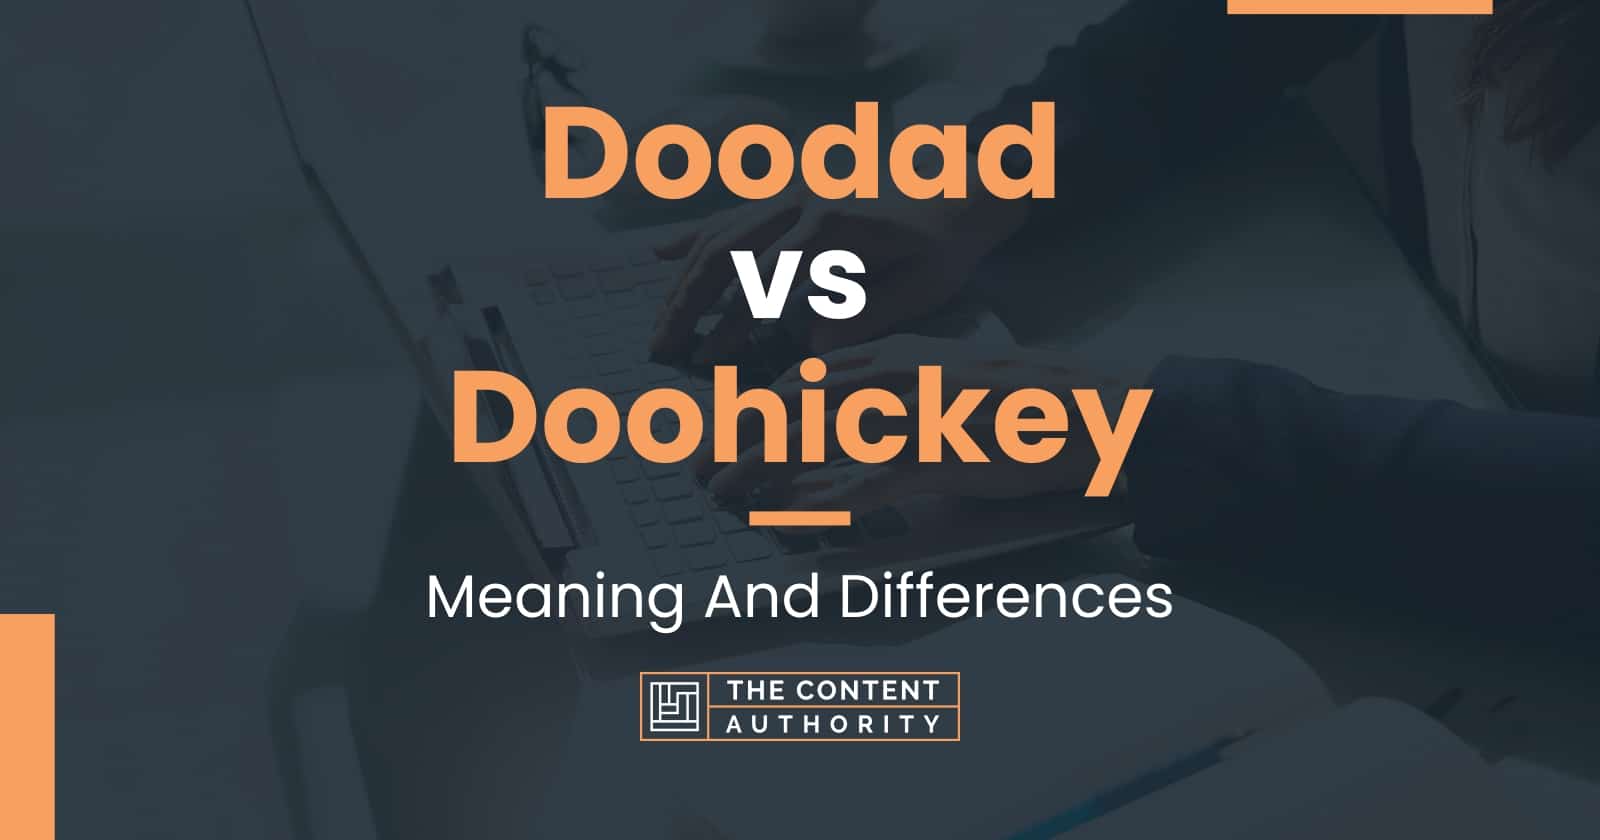 doodad-vs-doohickey-meaning-and-differences